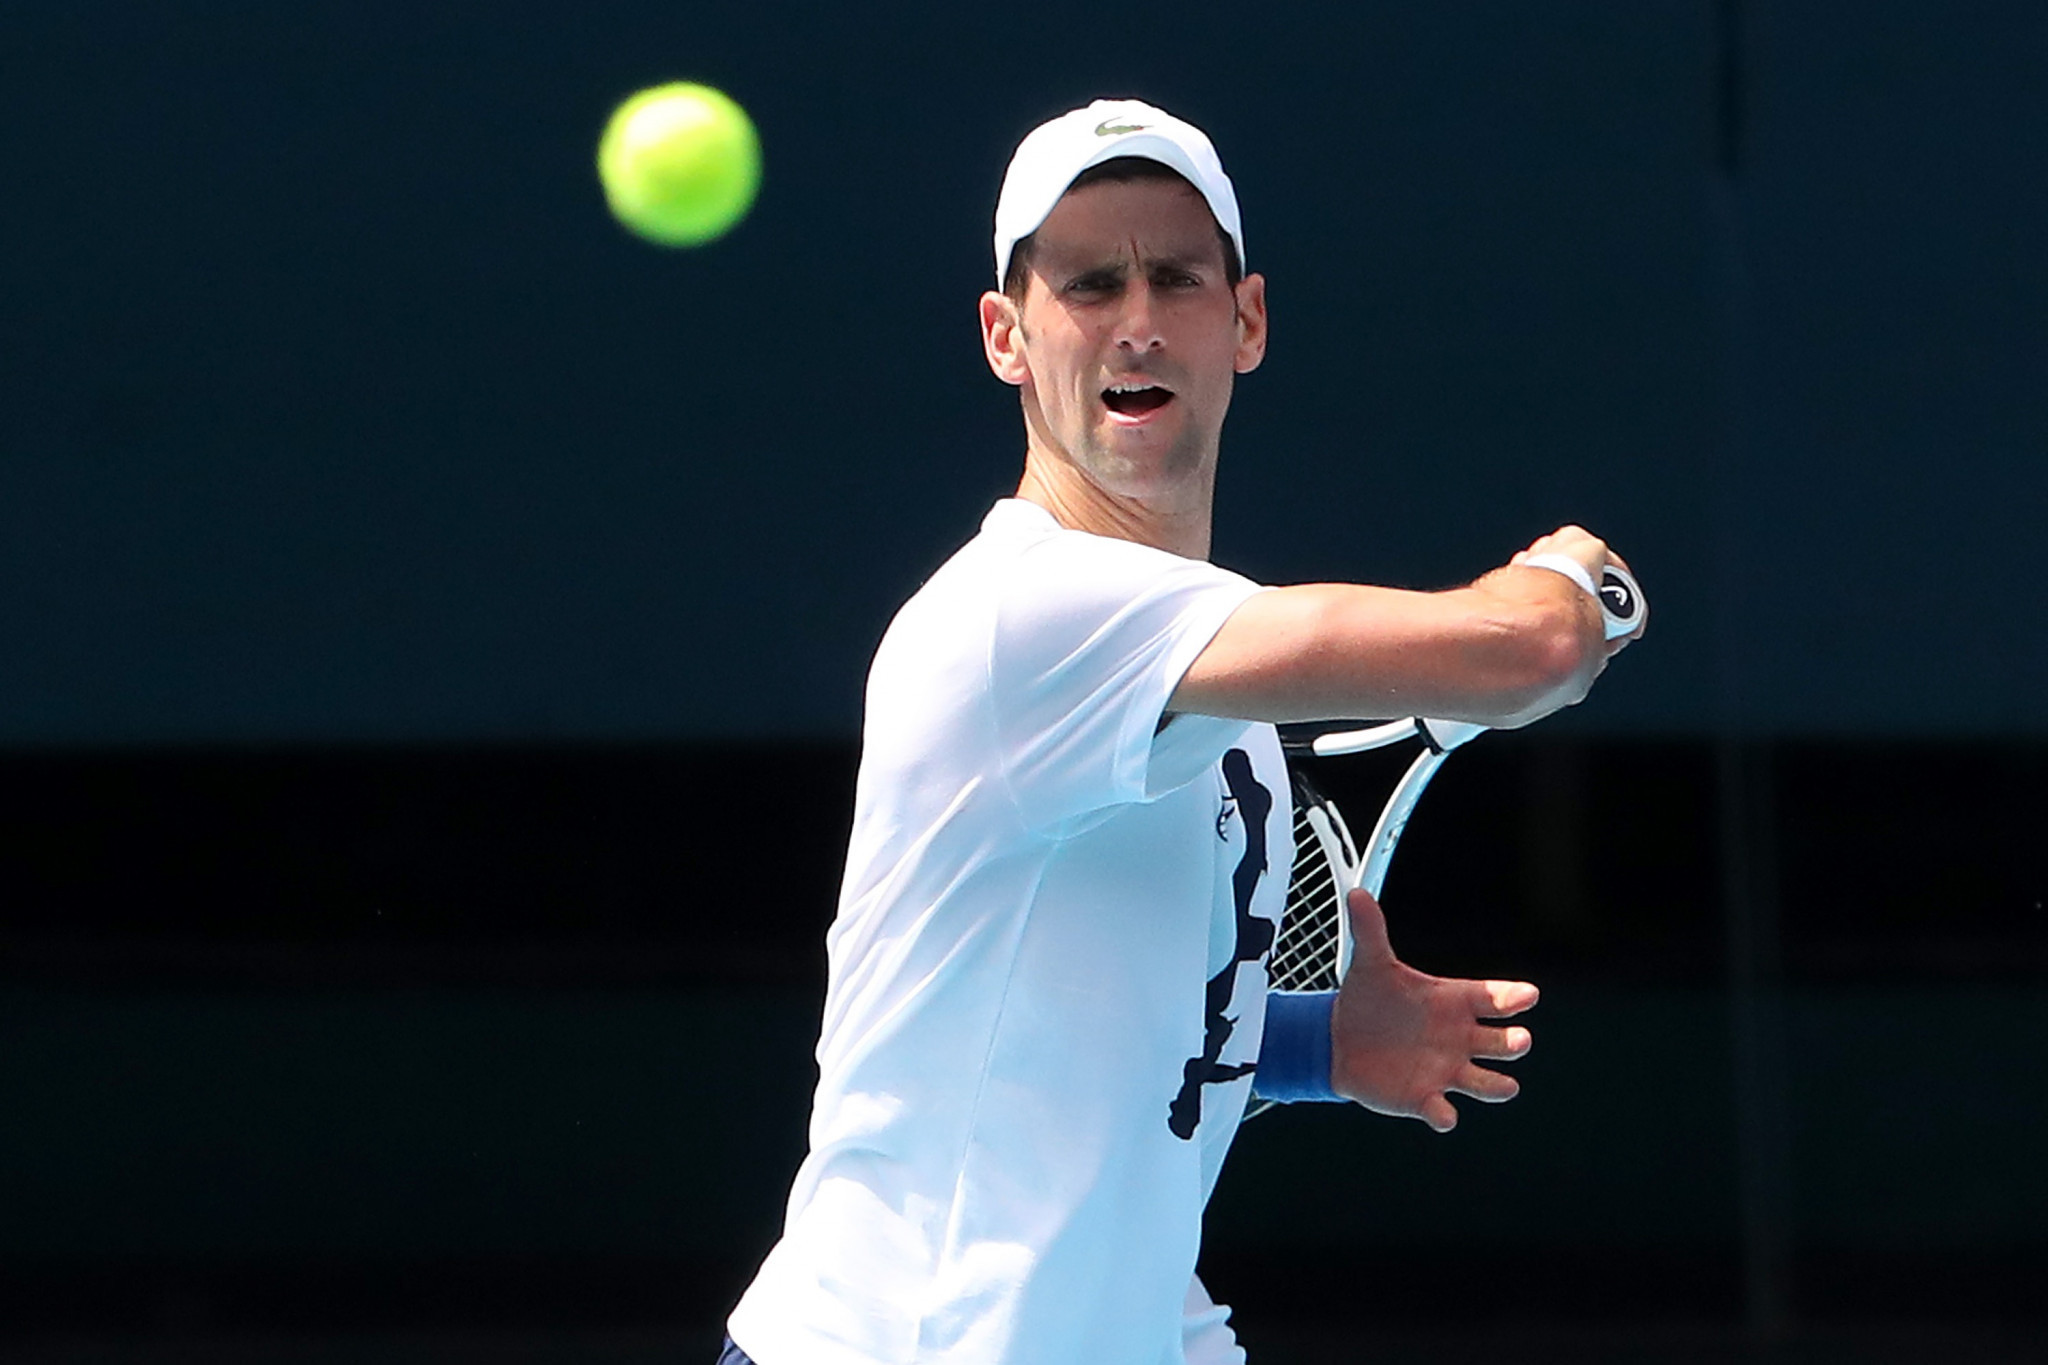 Djokovic deported and out of Australian Open after losing court battle